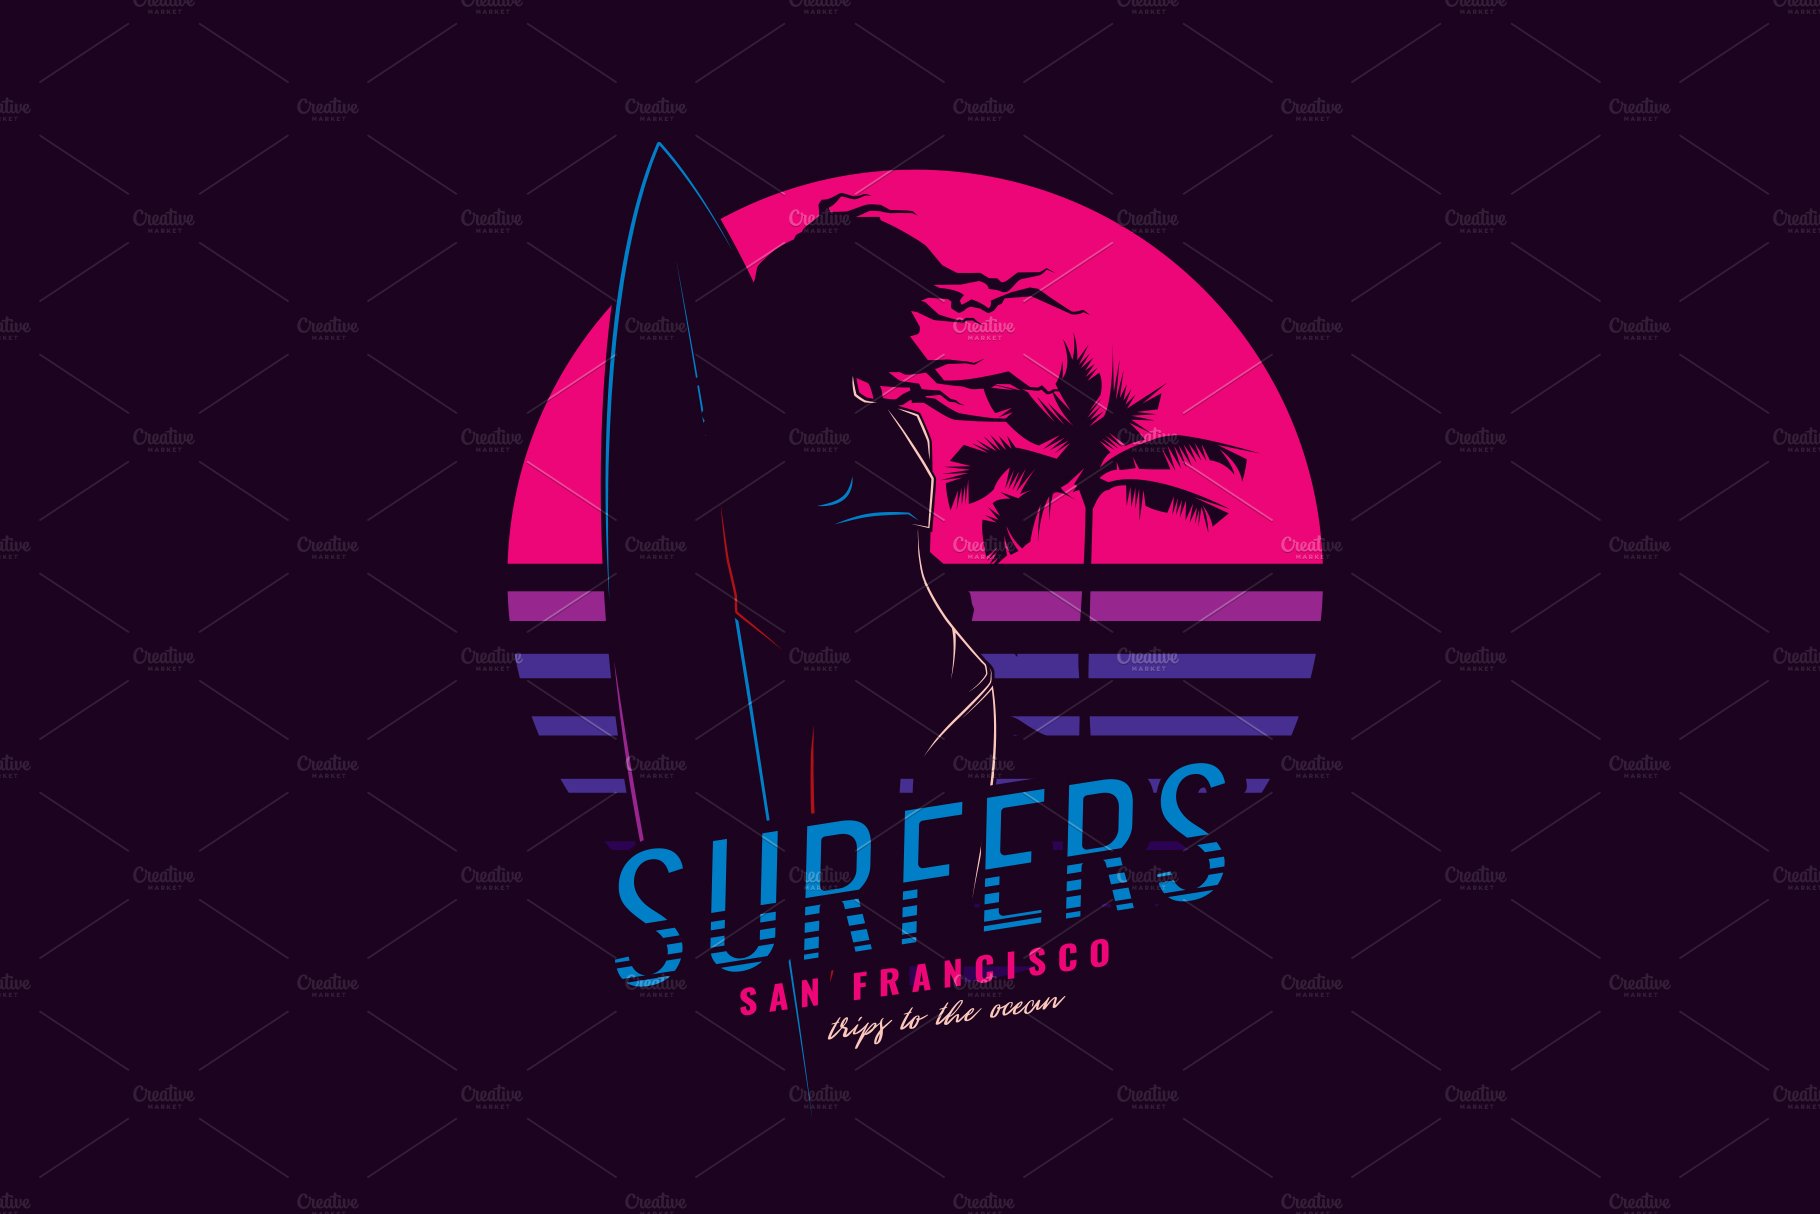 GIRL SURFING 80S STYLE cover image.